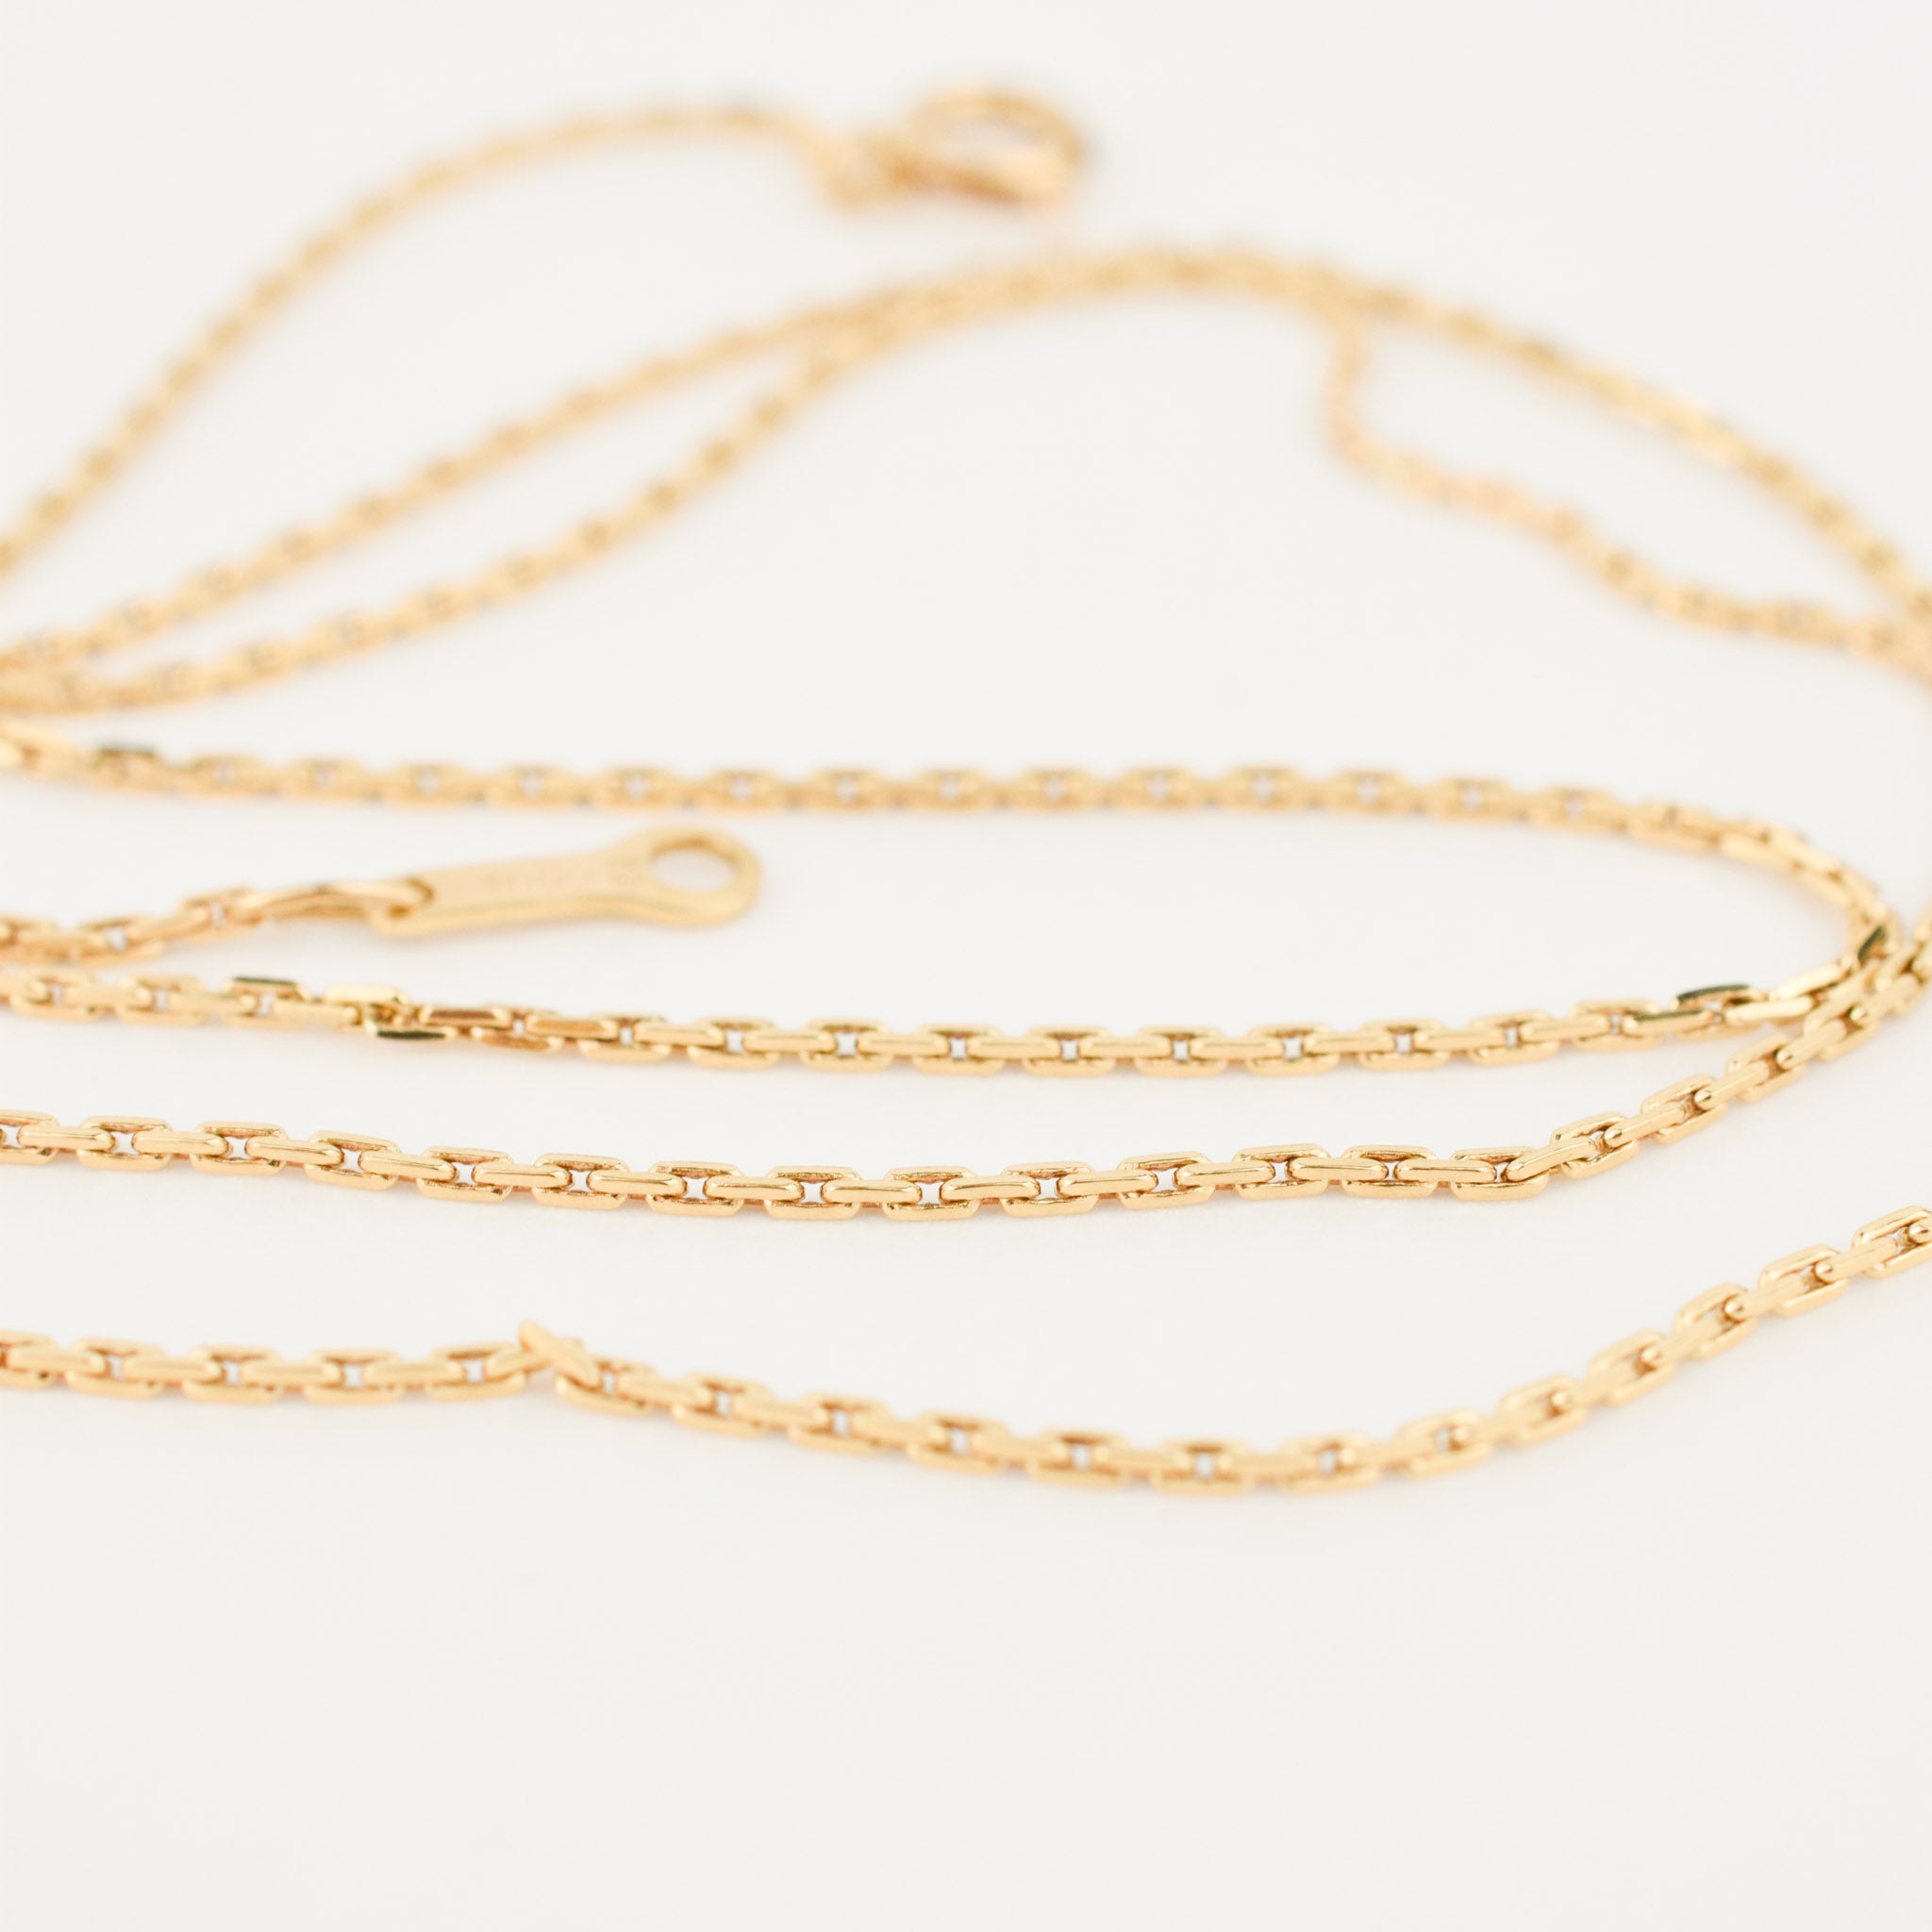 21" Dainty 18k Cable Link Chain Necklace